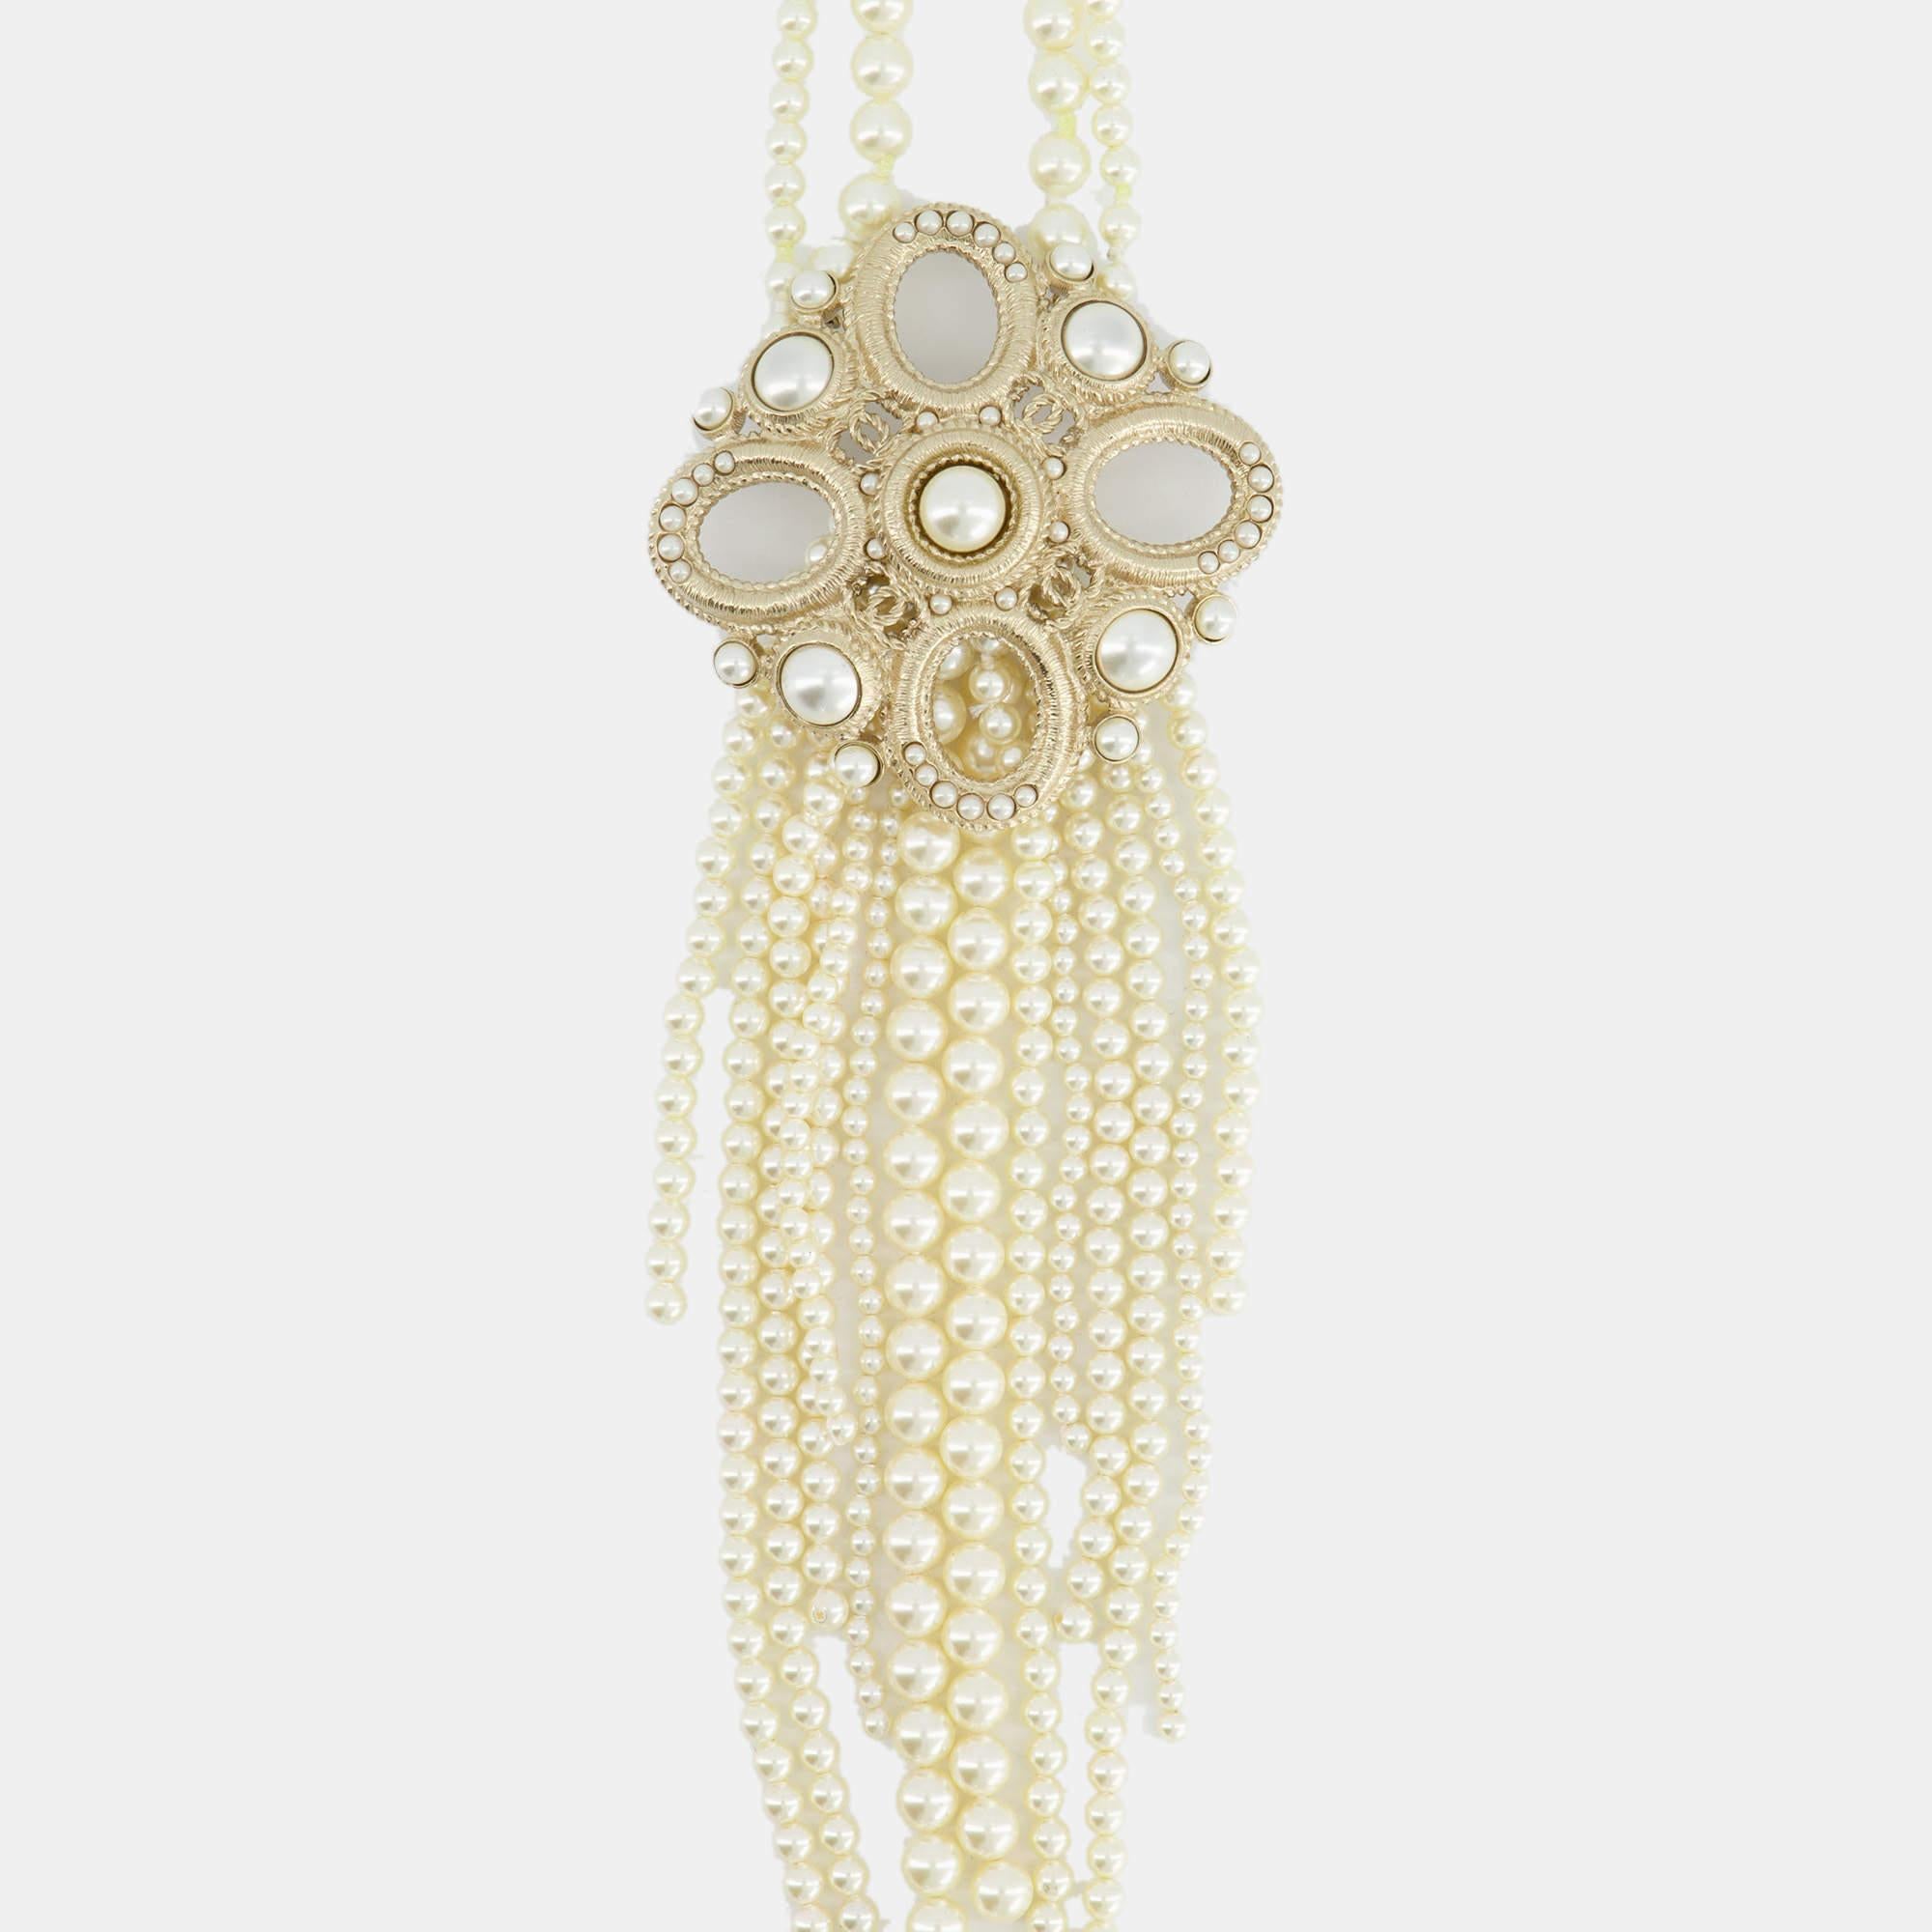 Chanel Choker Long Pearl Necklace with Antique Gold Pendant 2